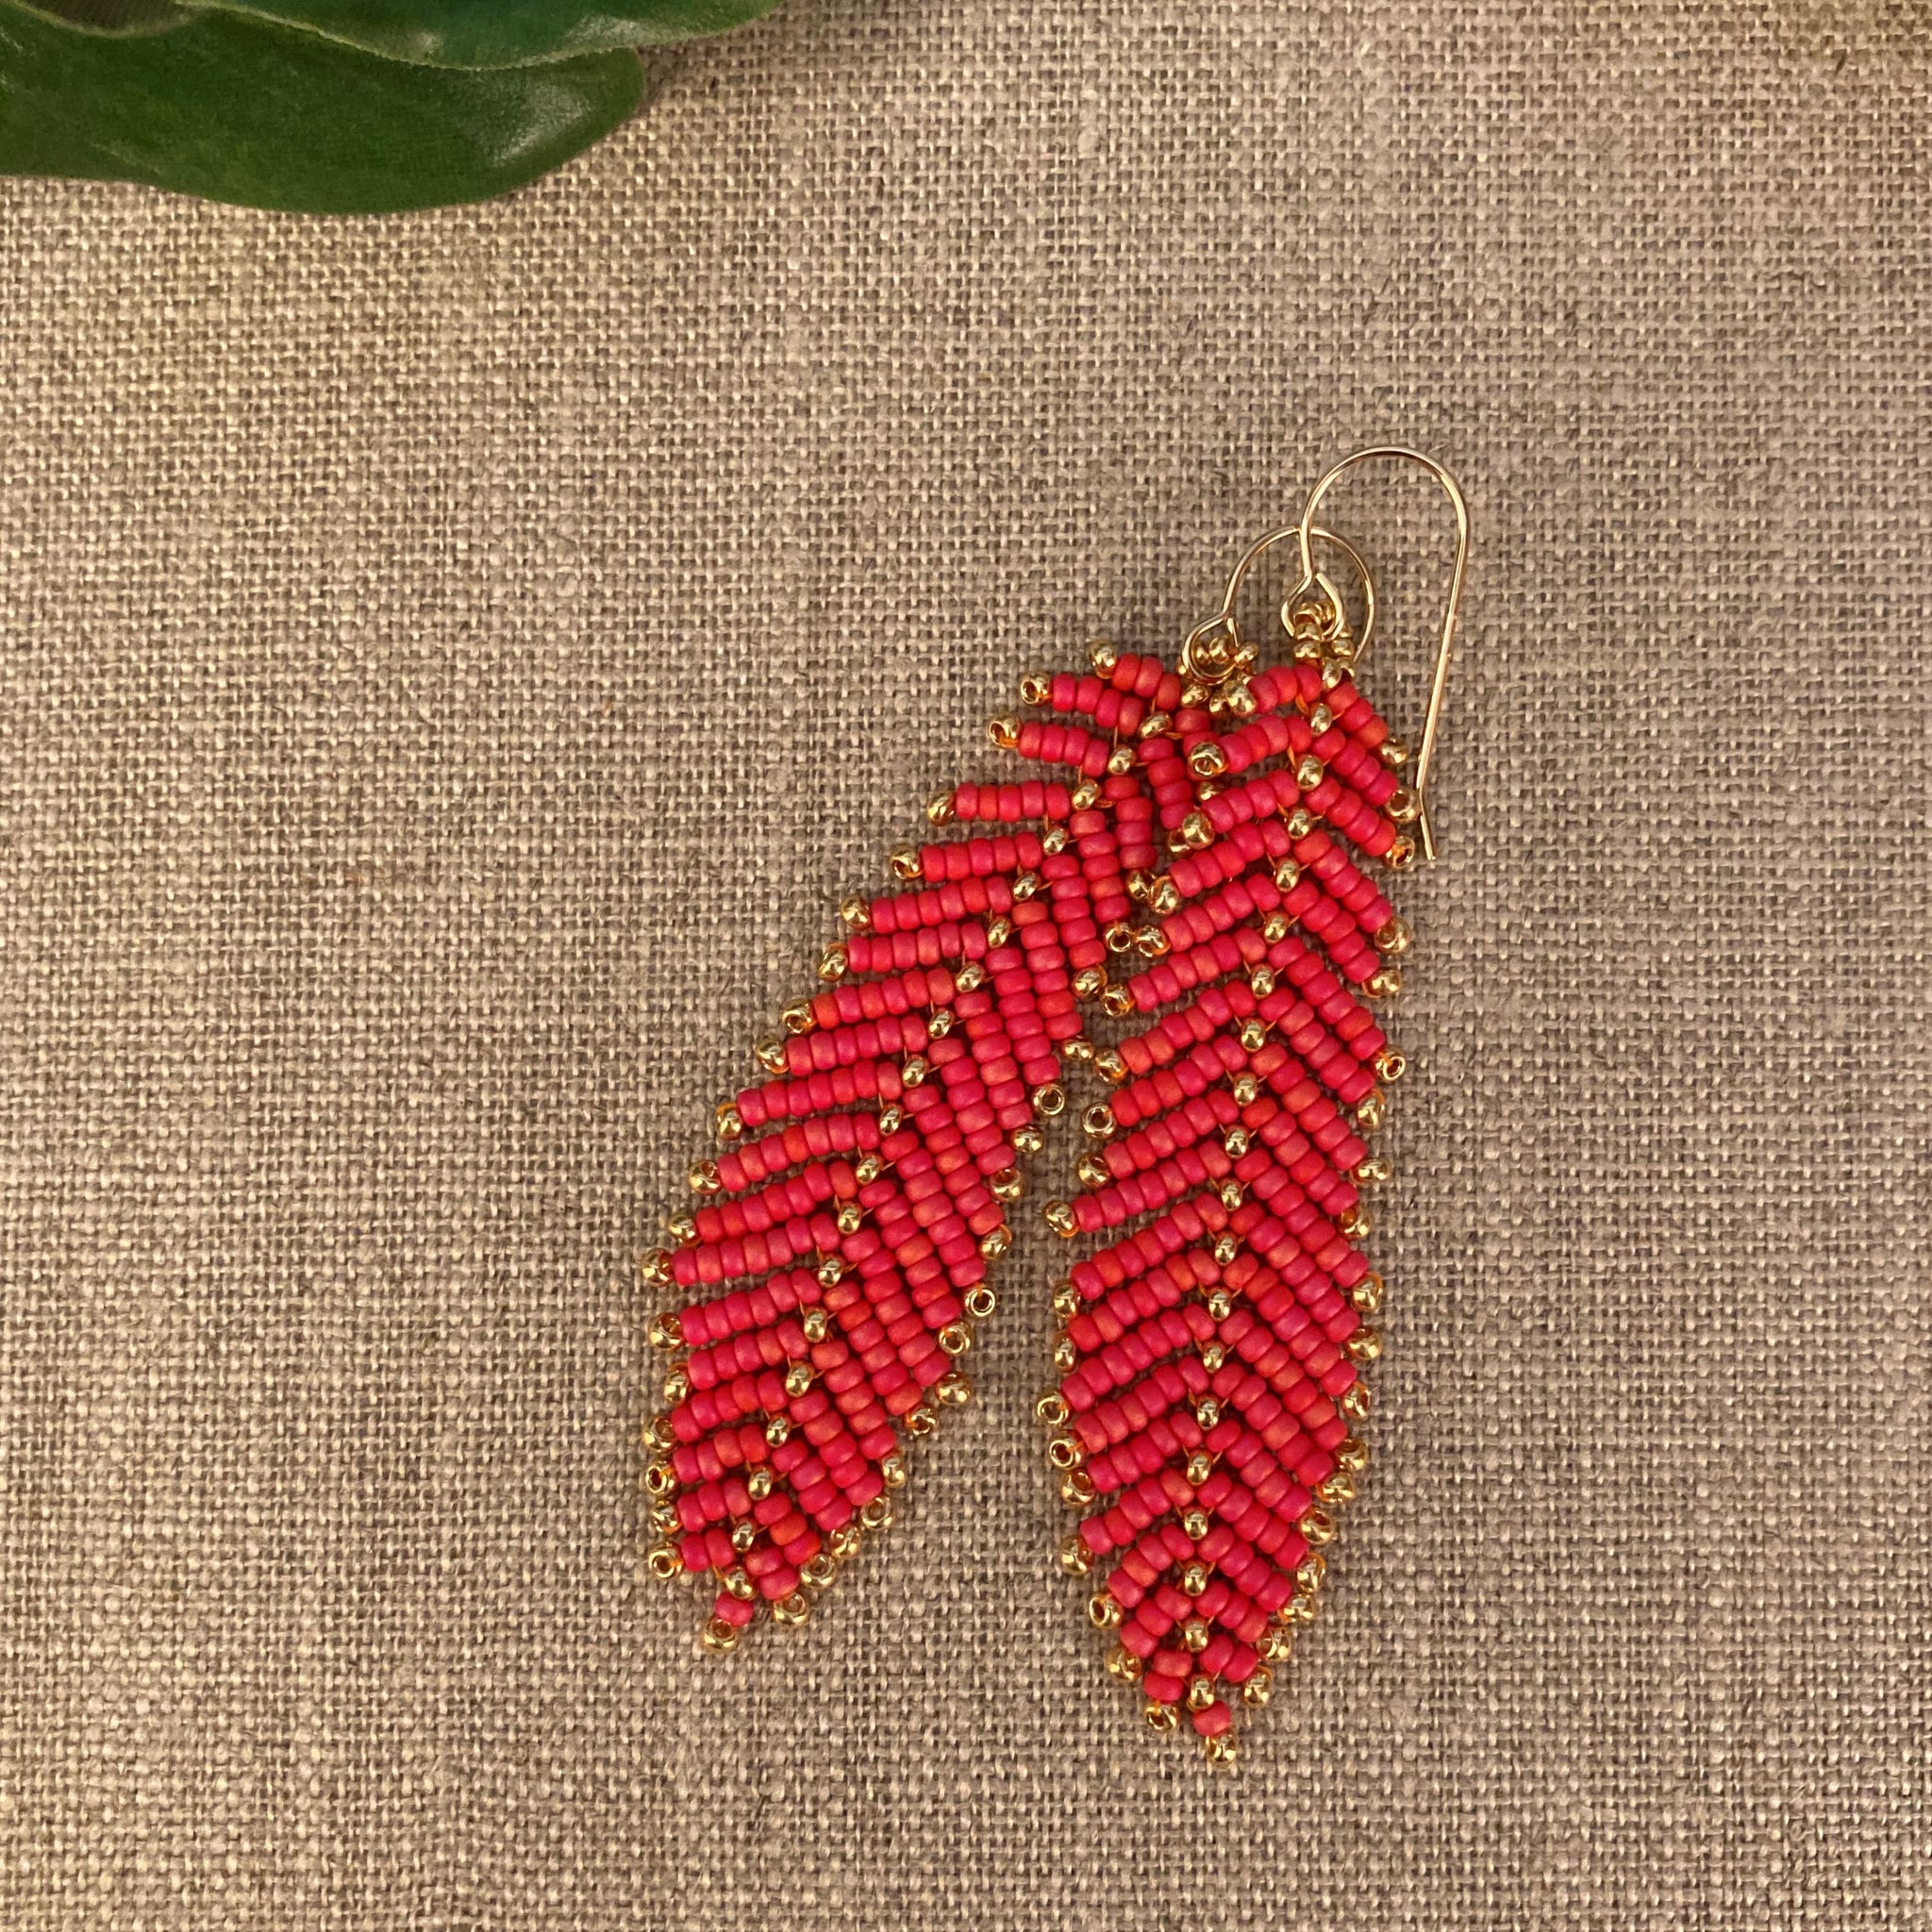 Feather Leaf Seed Bead Earrings Coral Gold 14K gold filled resort beach Summer lightweight Beaded By The Beach handmade USA